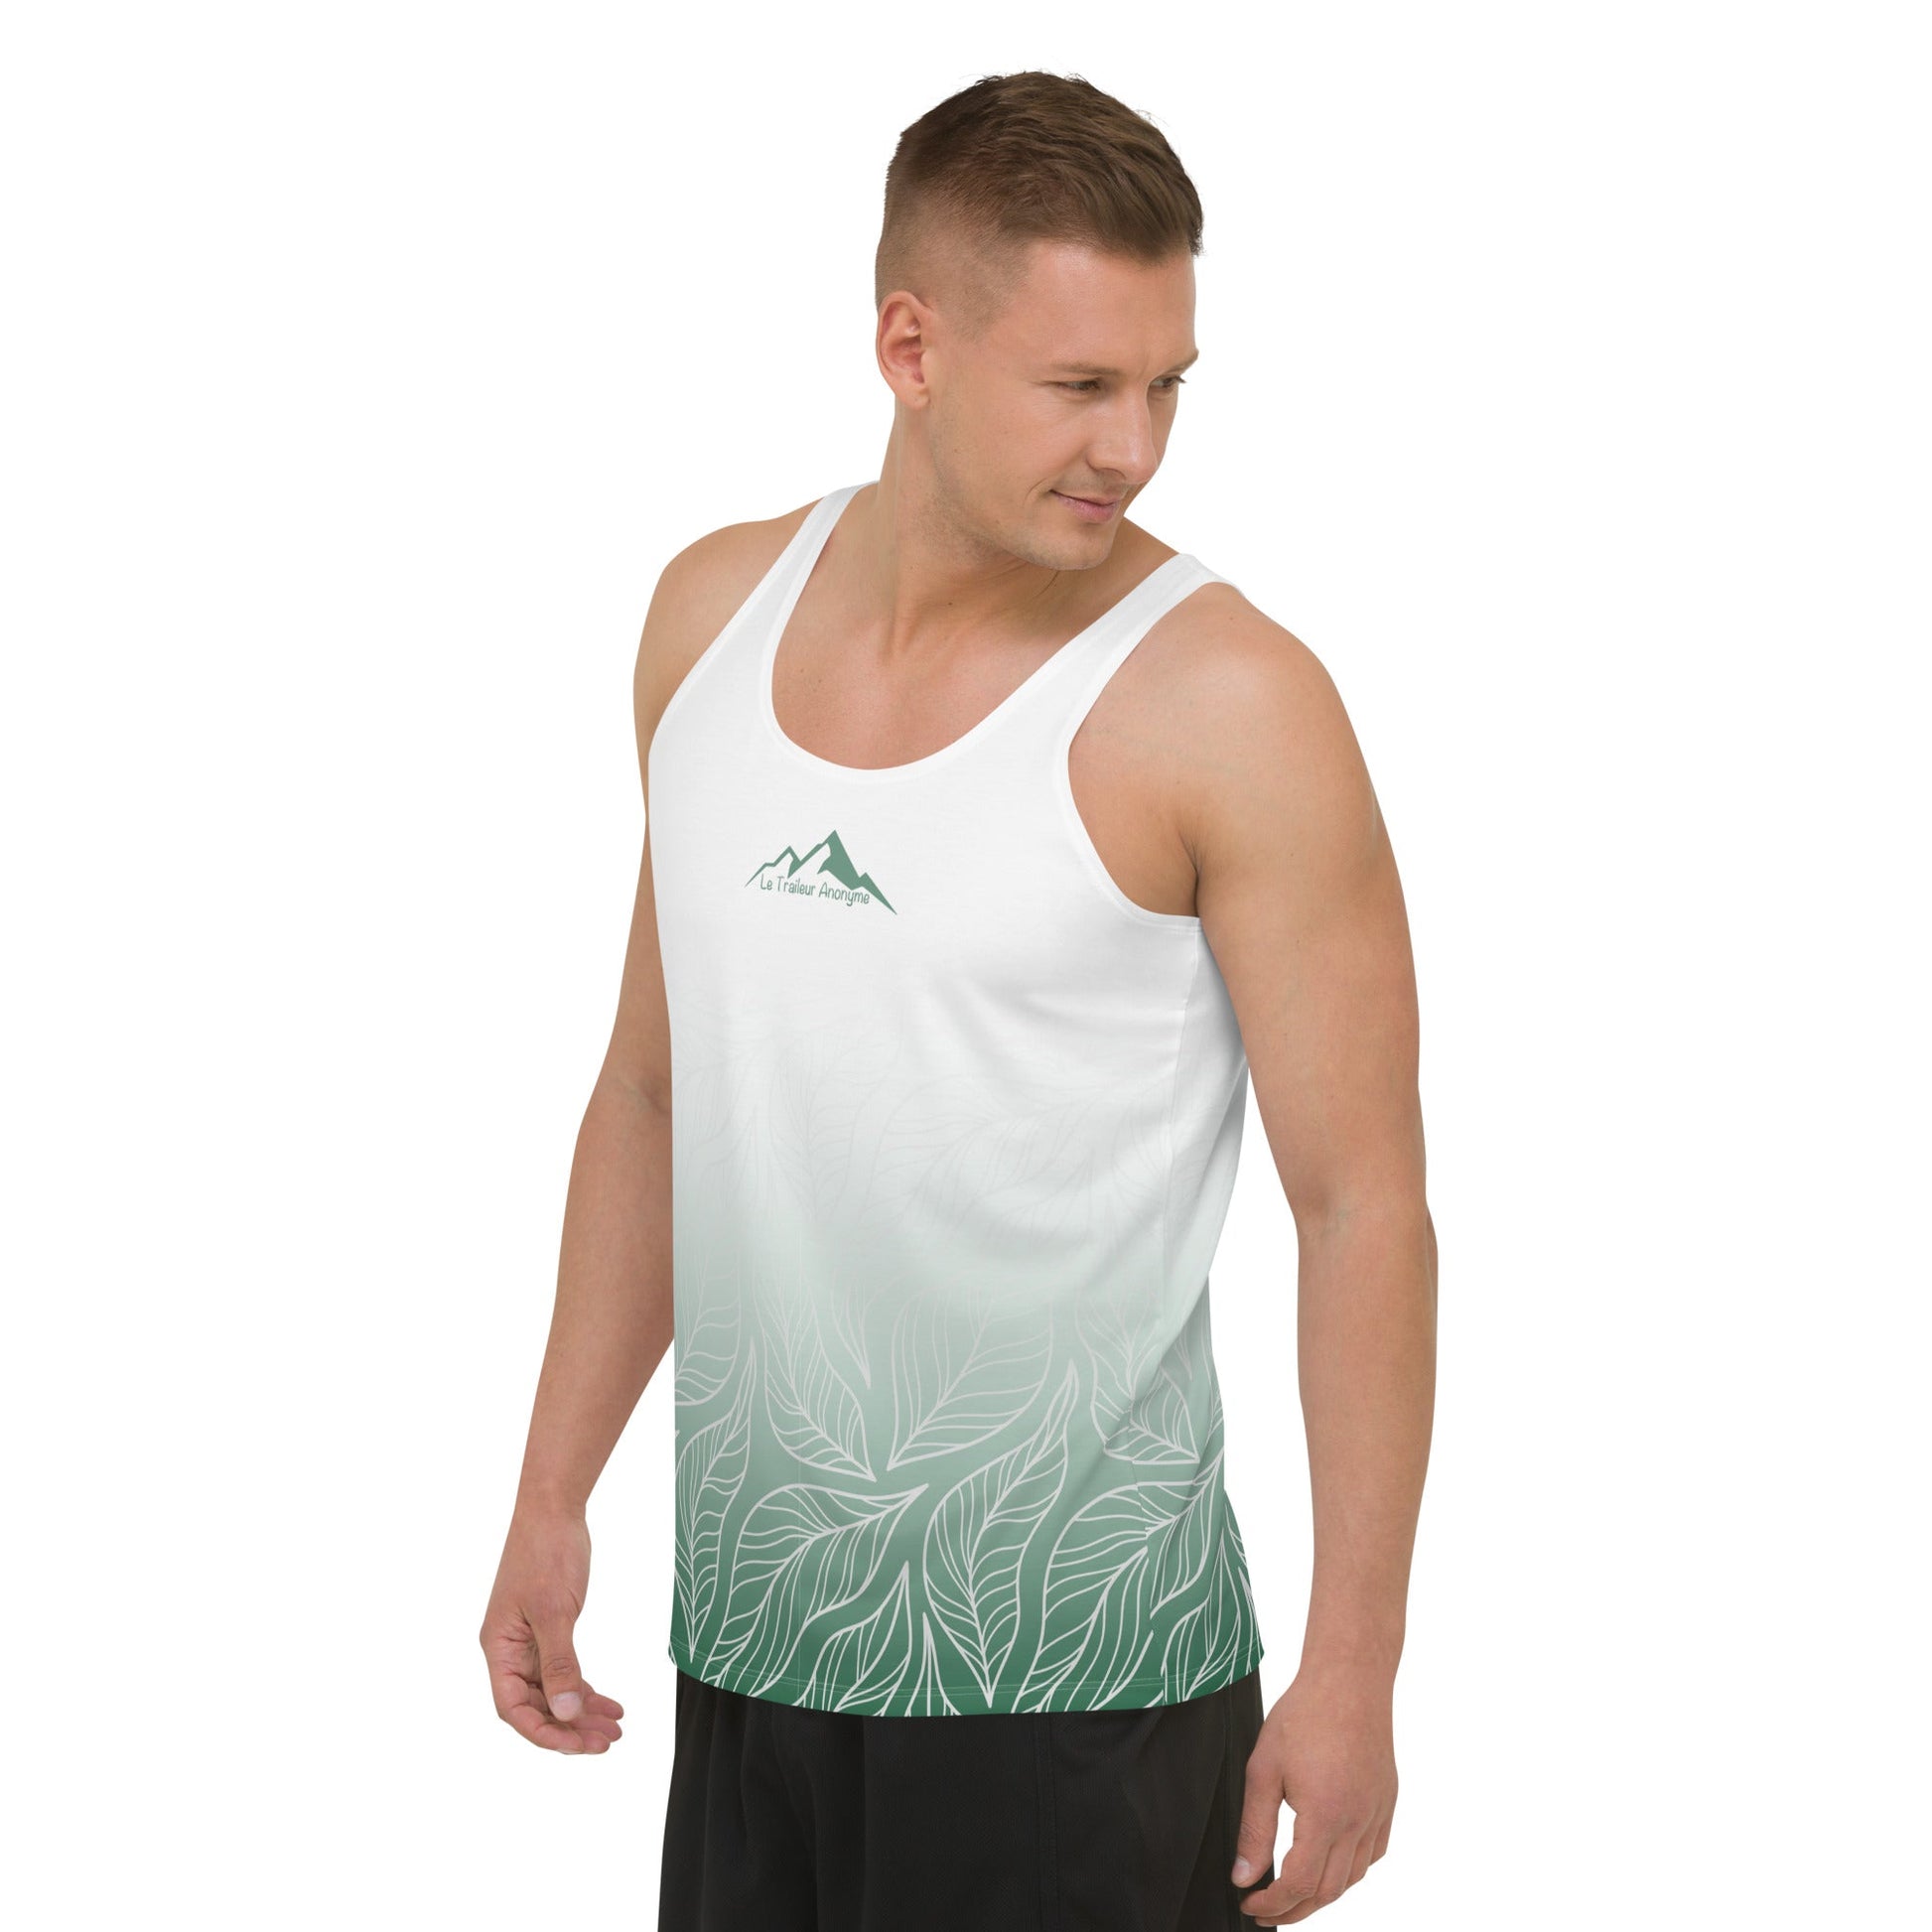 Débardeur Running Homme - Green Forest - Le Traileur Anonyme